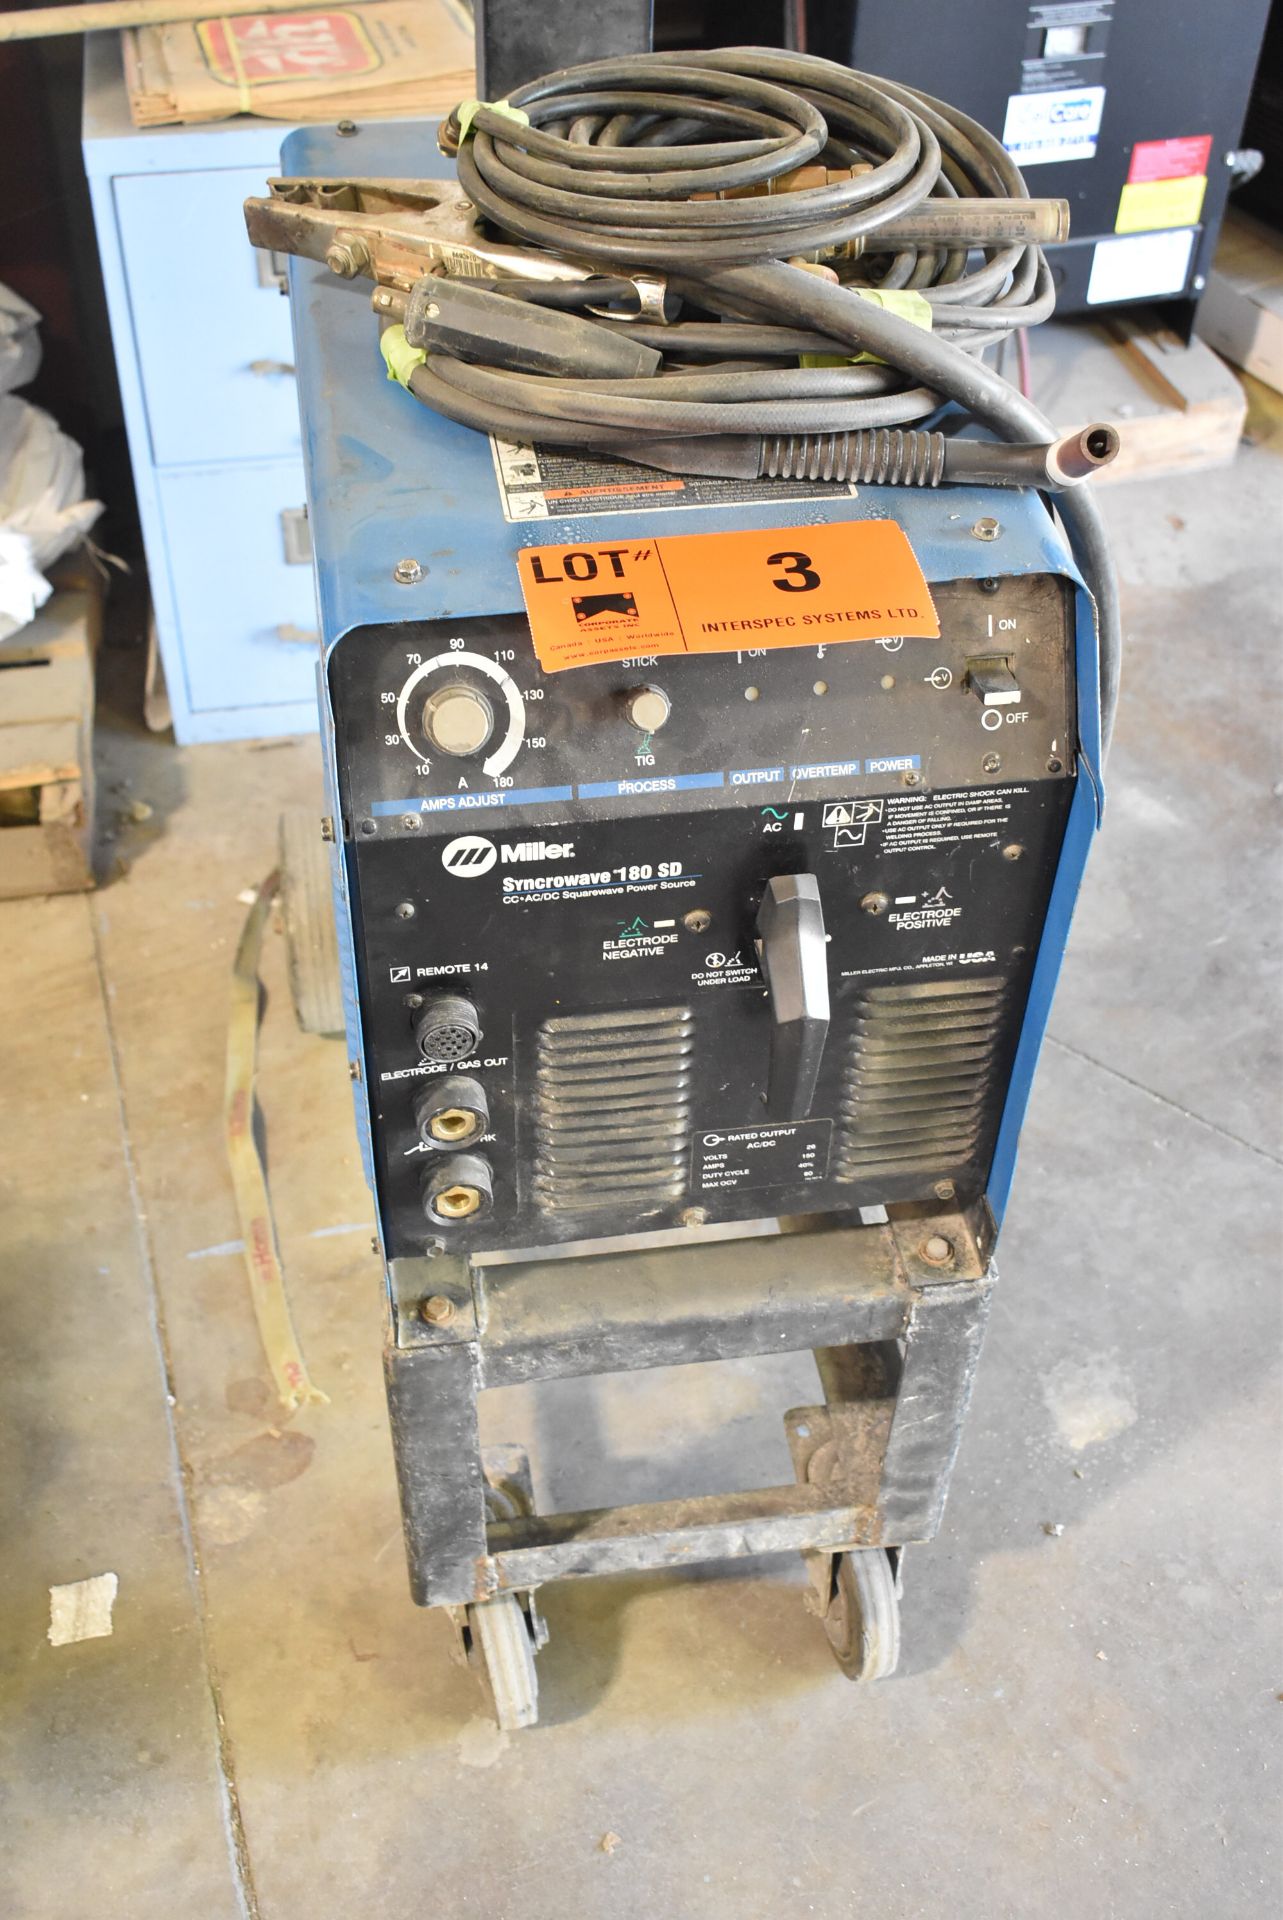 MILLER SYNCROWAVE180 DS TIG WELDER WITH CABLES AND GUN, S/N LA197136 [RIGGING FOR FOR LOT #3 - $25